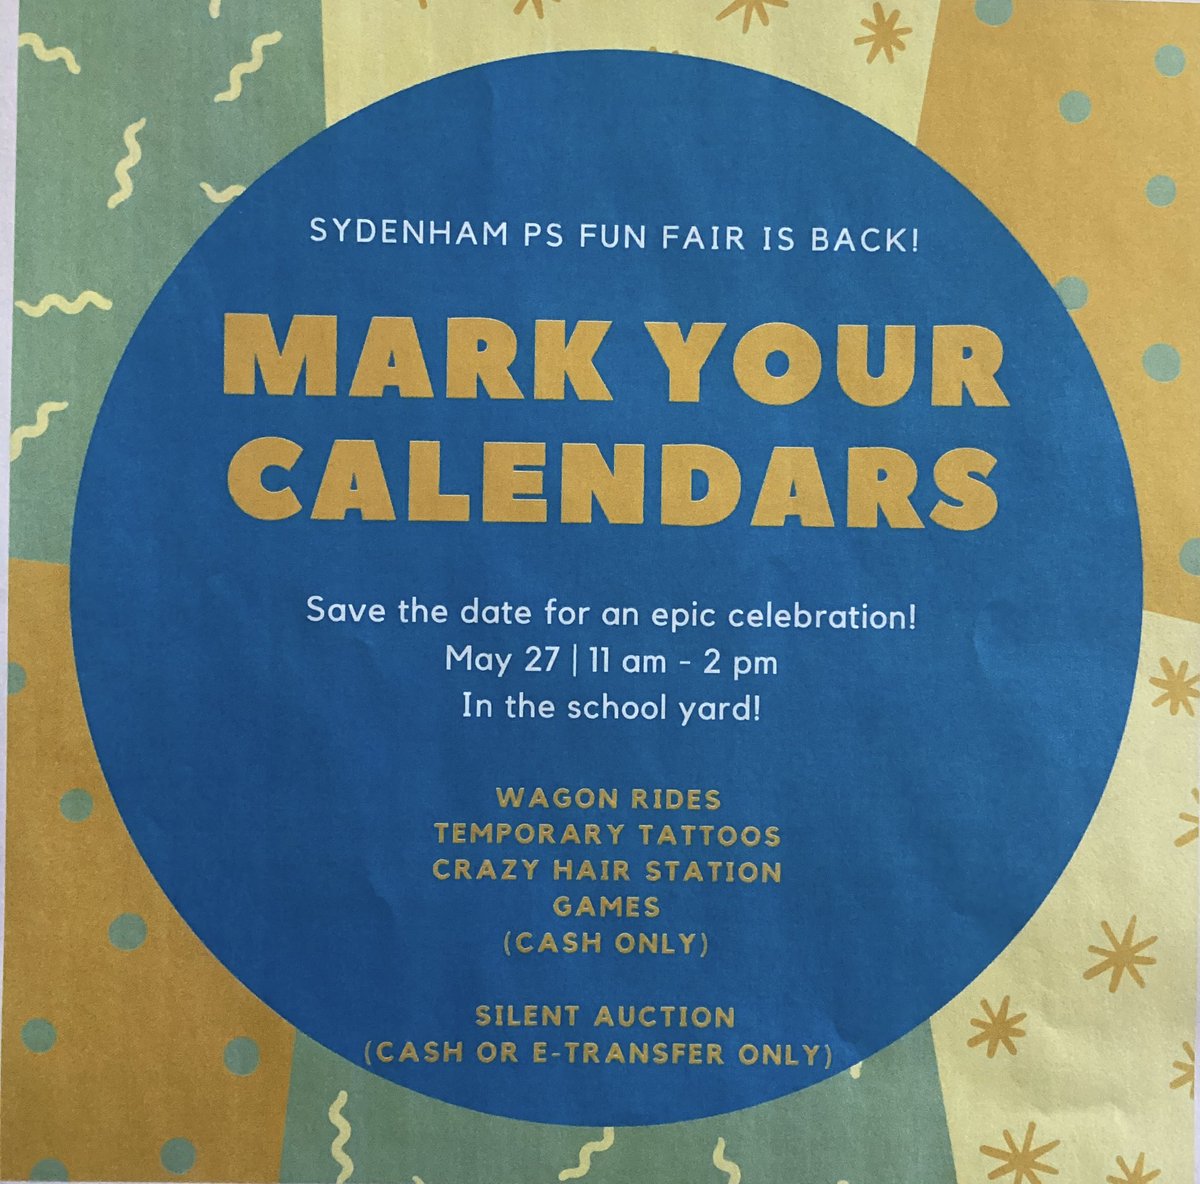 The Fun Fair is back! The Fun Fair is back! Save the date…May 27th from 11-2 @SydenhamPS_LDSB Lots of fun things to do! #Seeyouthere #Sydenhamrocks